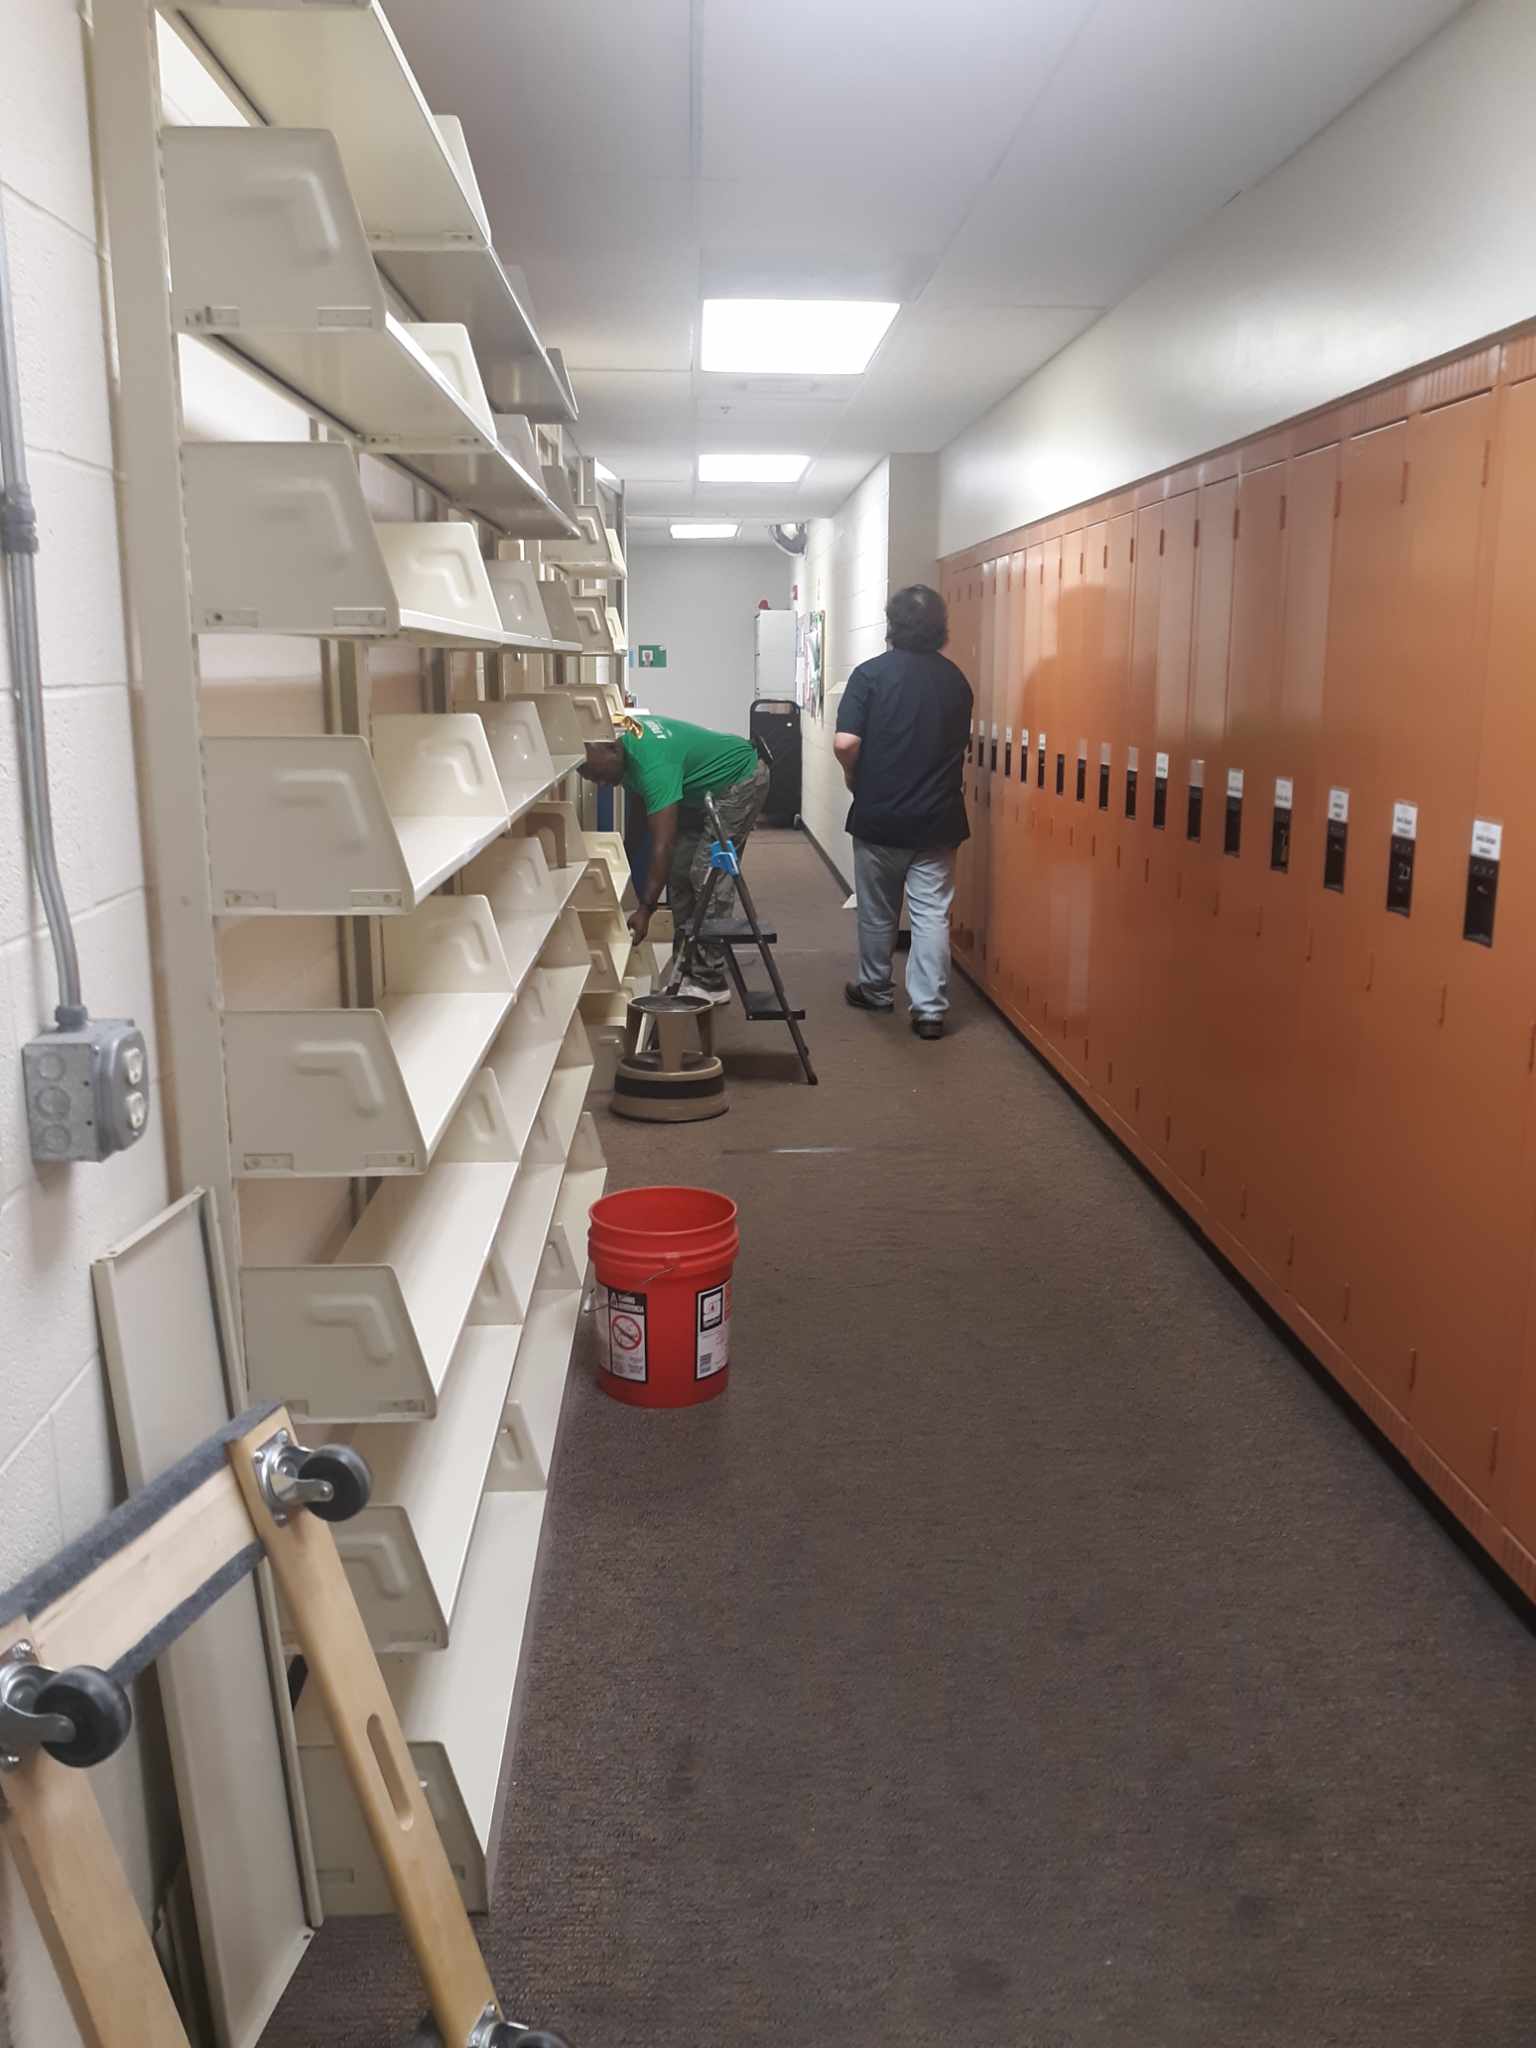 Staff taking down the Book Club Kit shelve that stood in a back hallway in the staff area.